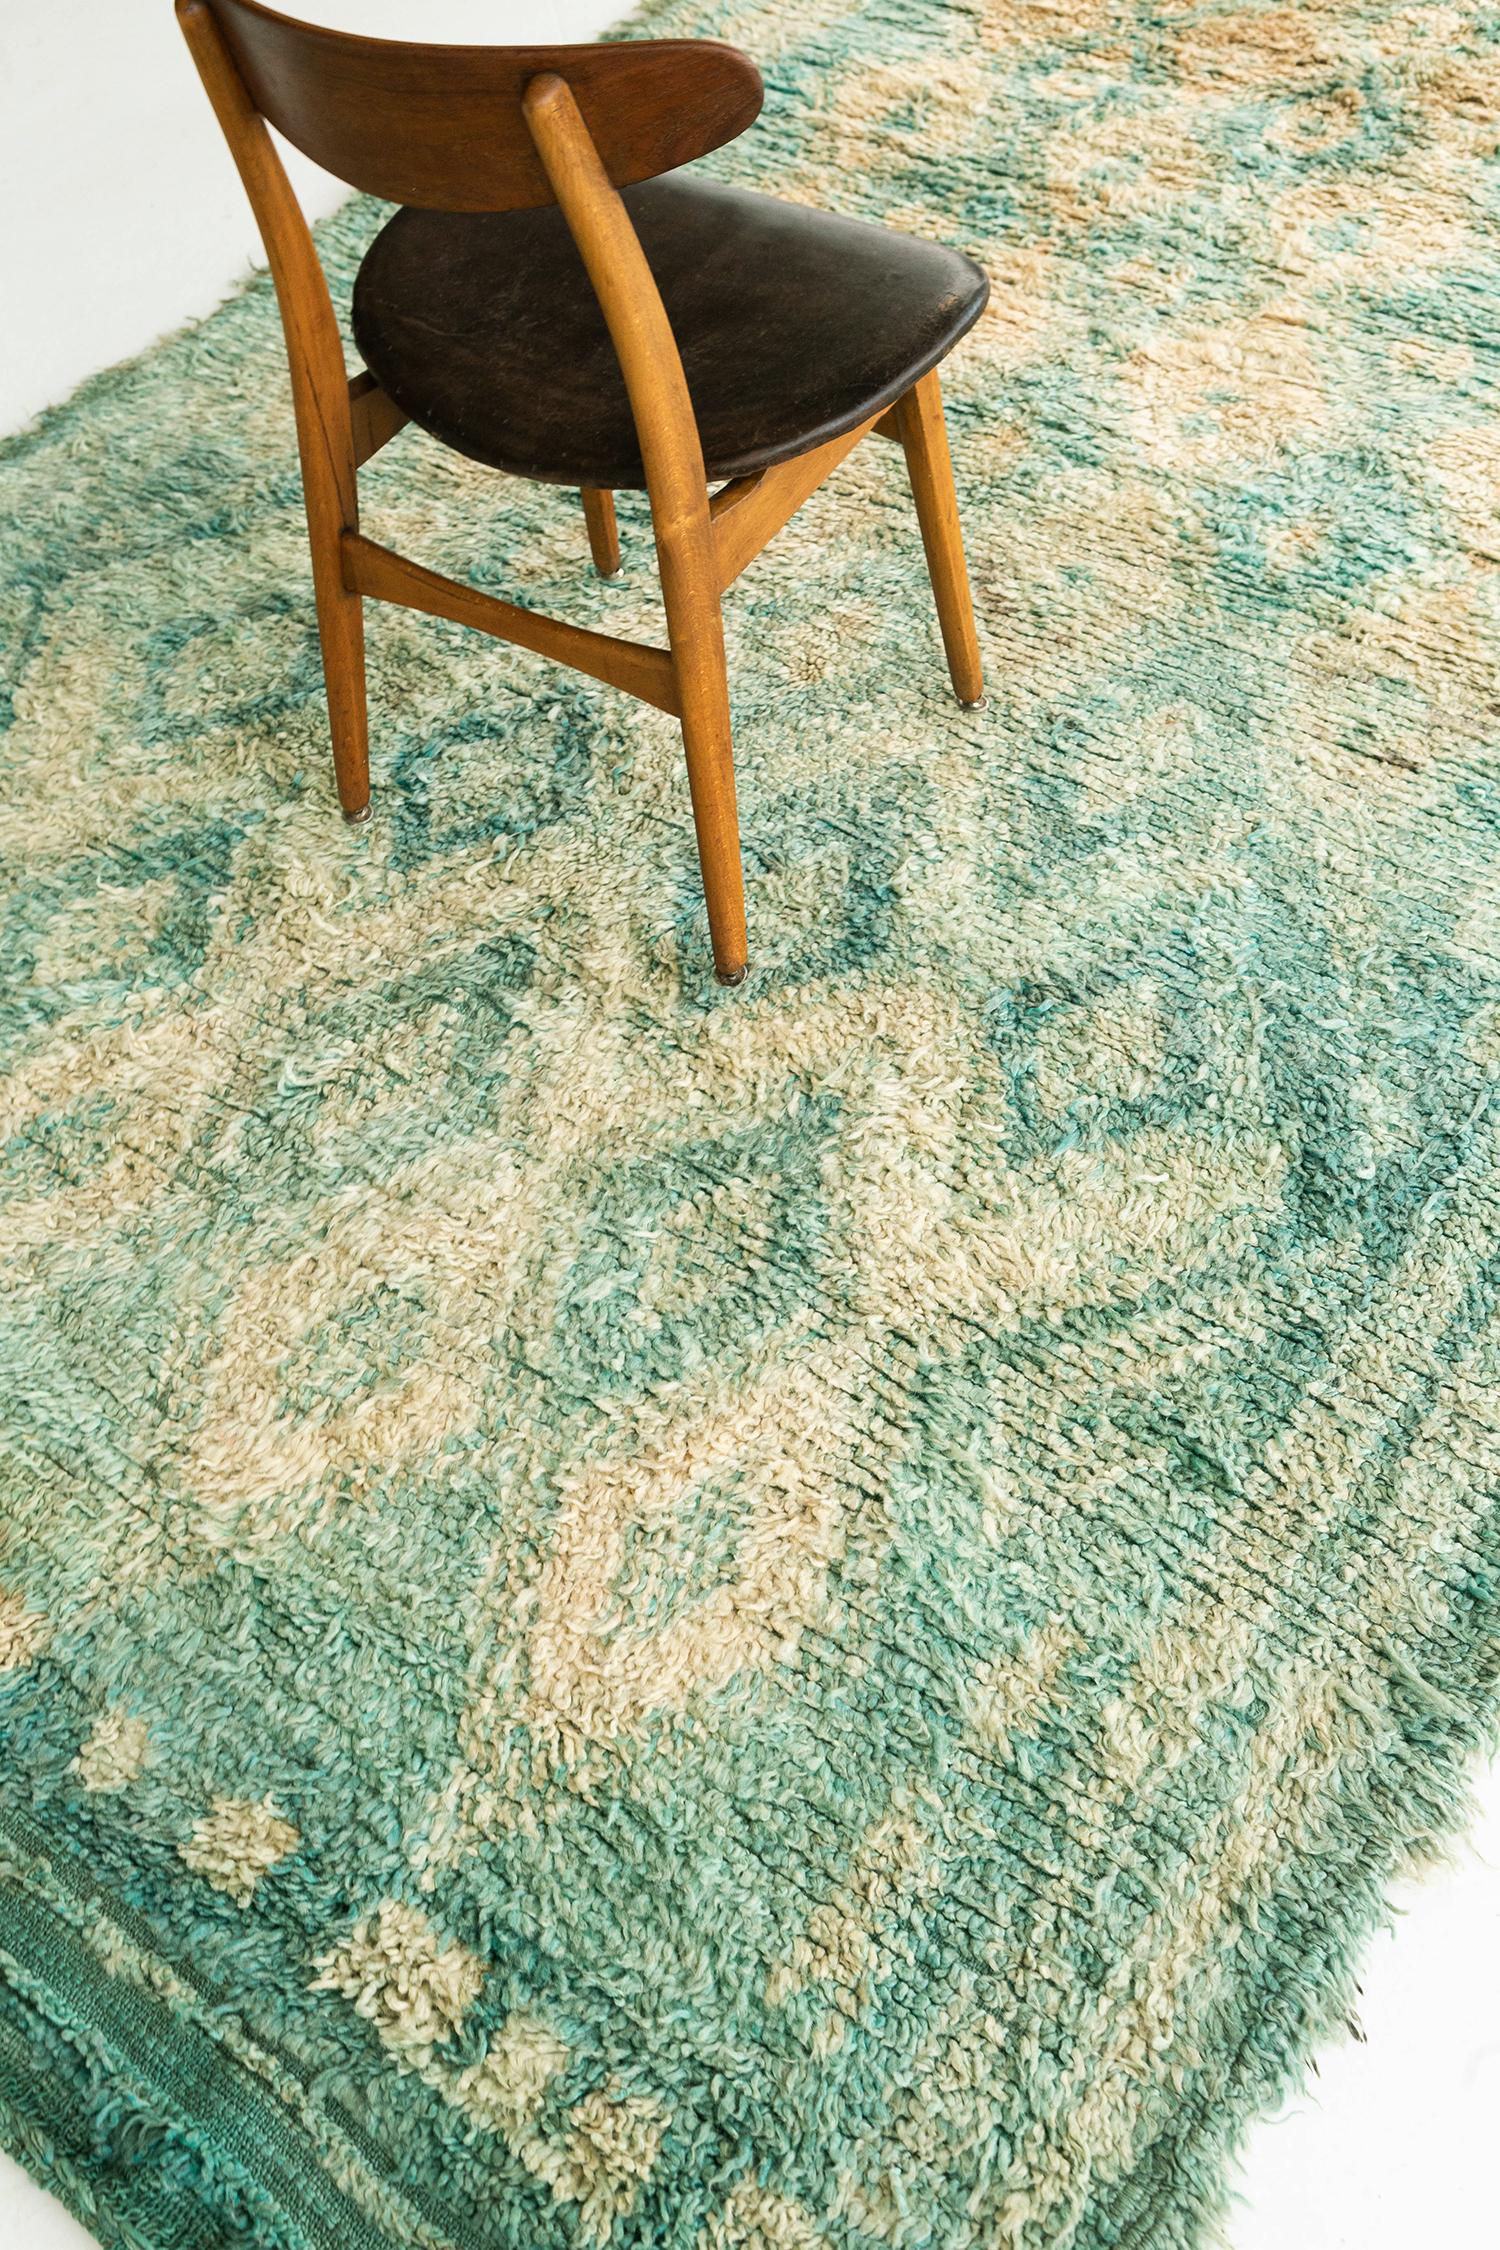 Sea green and yellow wool pile weave handwoven into a one of a kind Moroccan Beni Ourain tribe Berber rug. This piece contains traditional diamond motifs latticed throughout the field. Beni Ourain tribal rugs are known for their geometric patterns